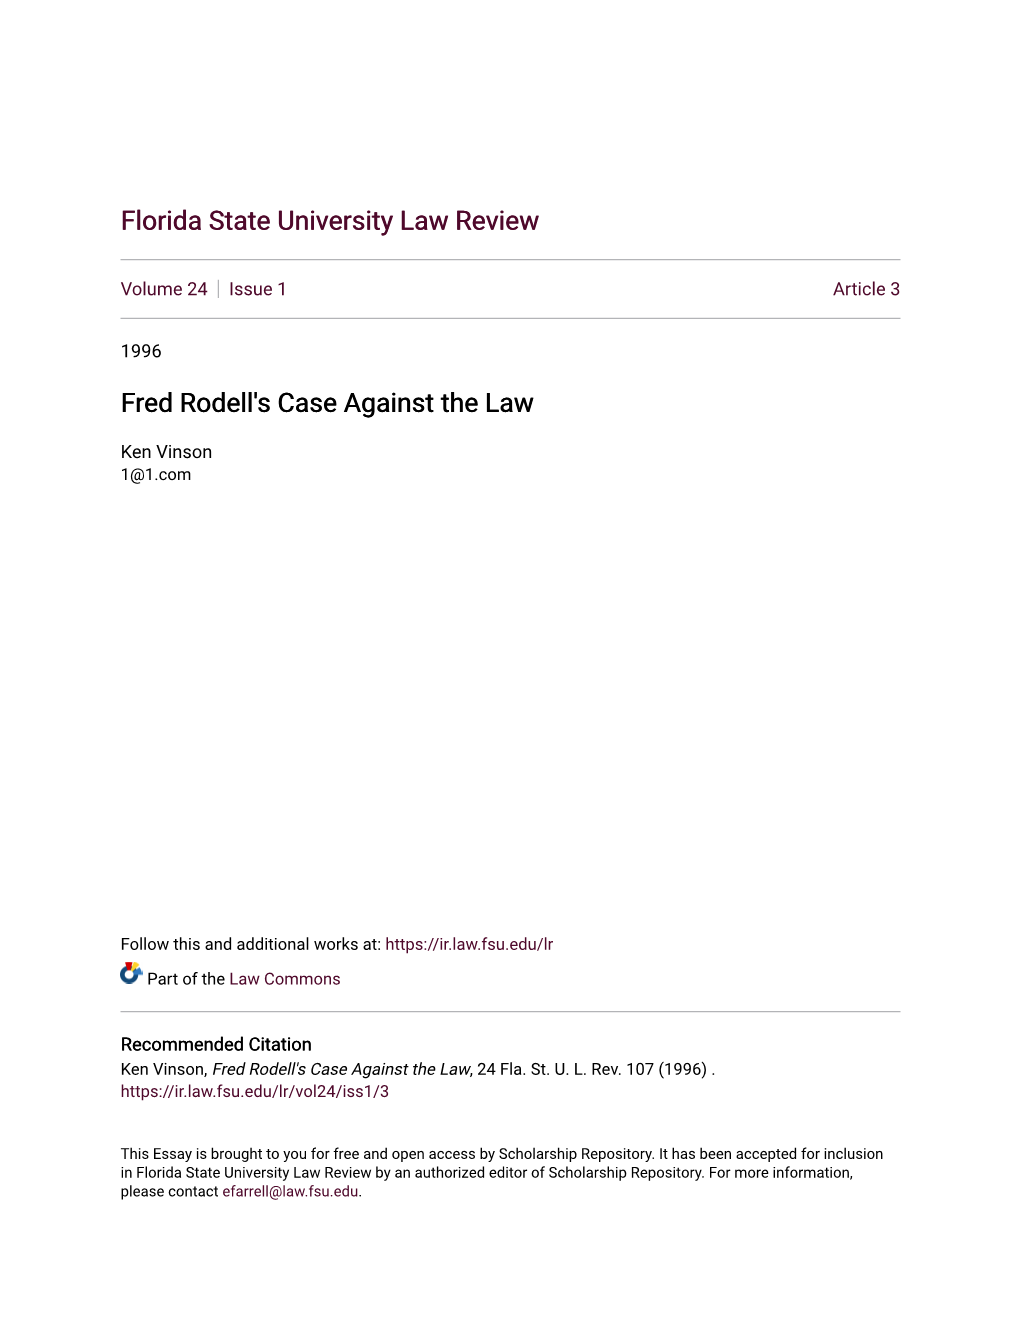 Fred Rodell's Case Against the Law